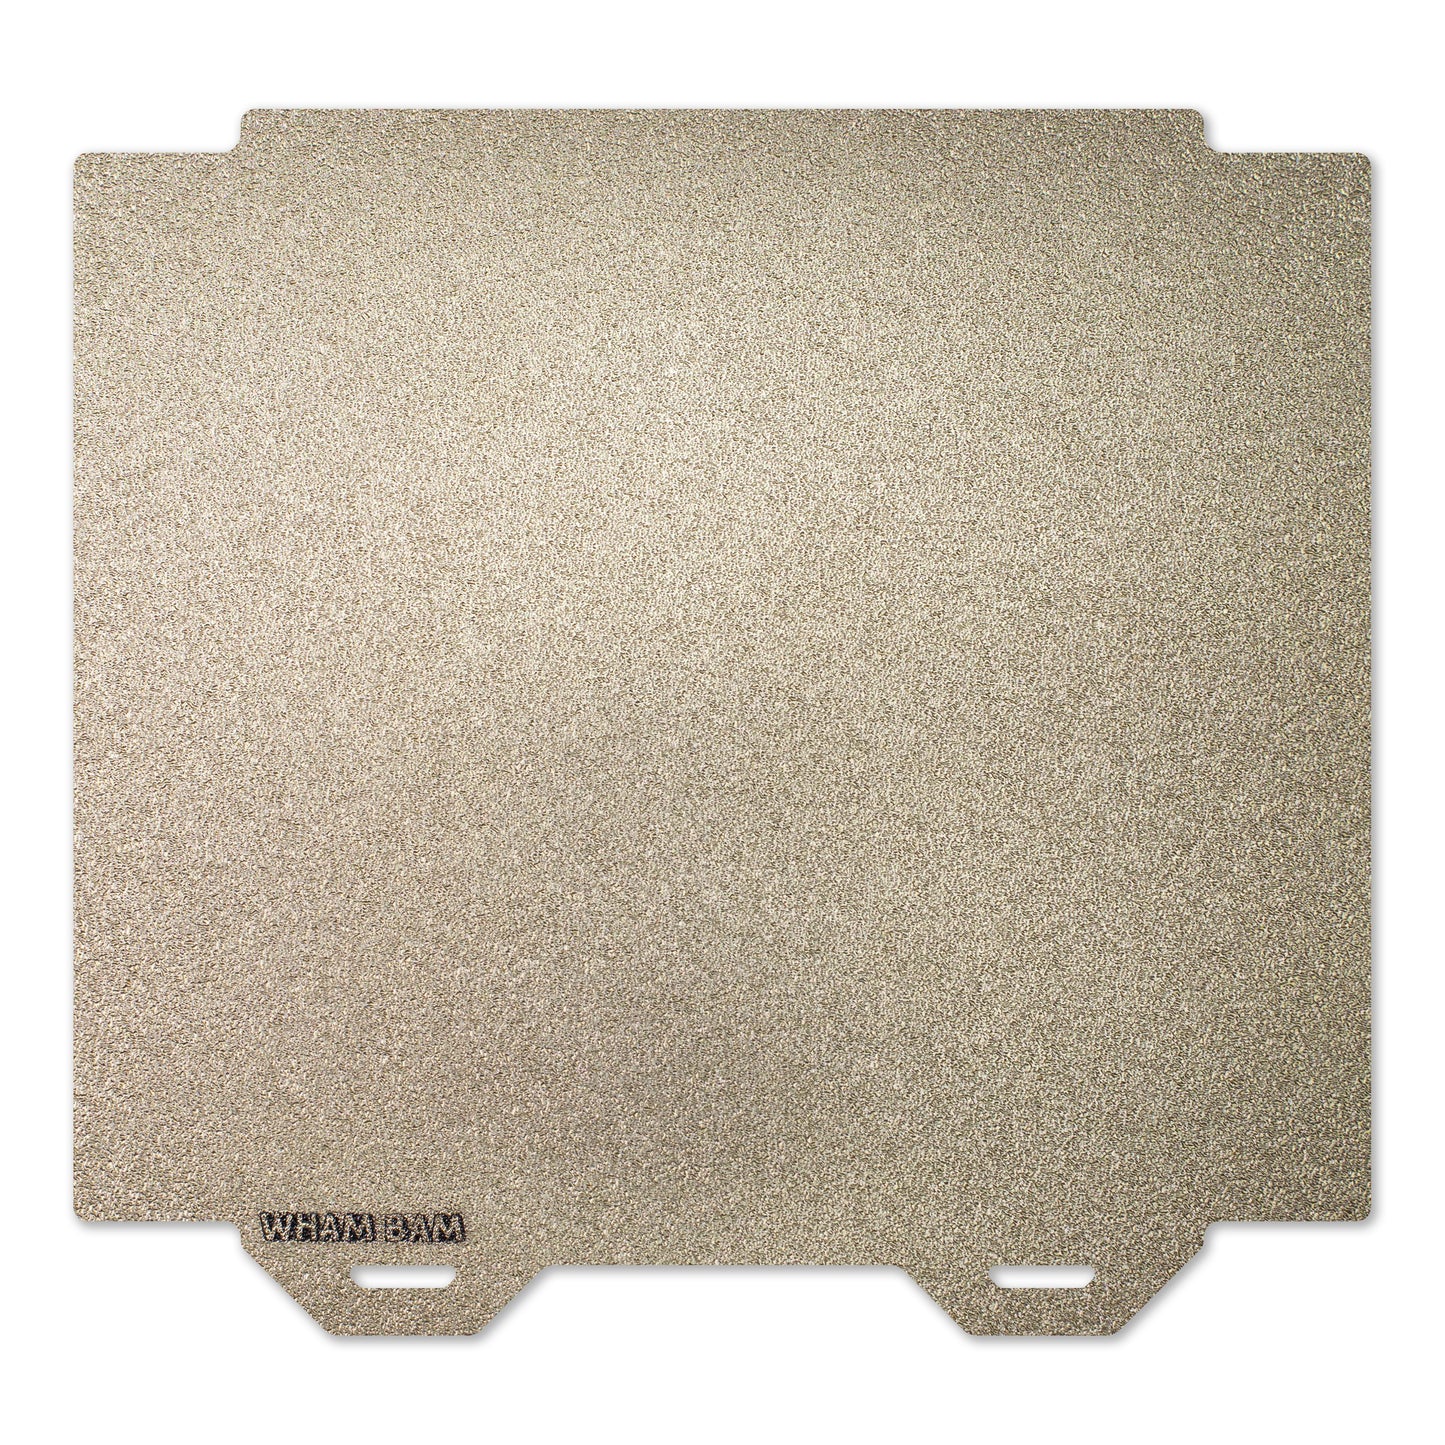 Flexi Plate with Textured ULTEM PEI - 258 x 230 w/ Cut Out Corners